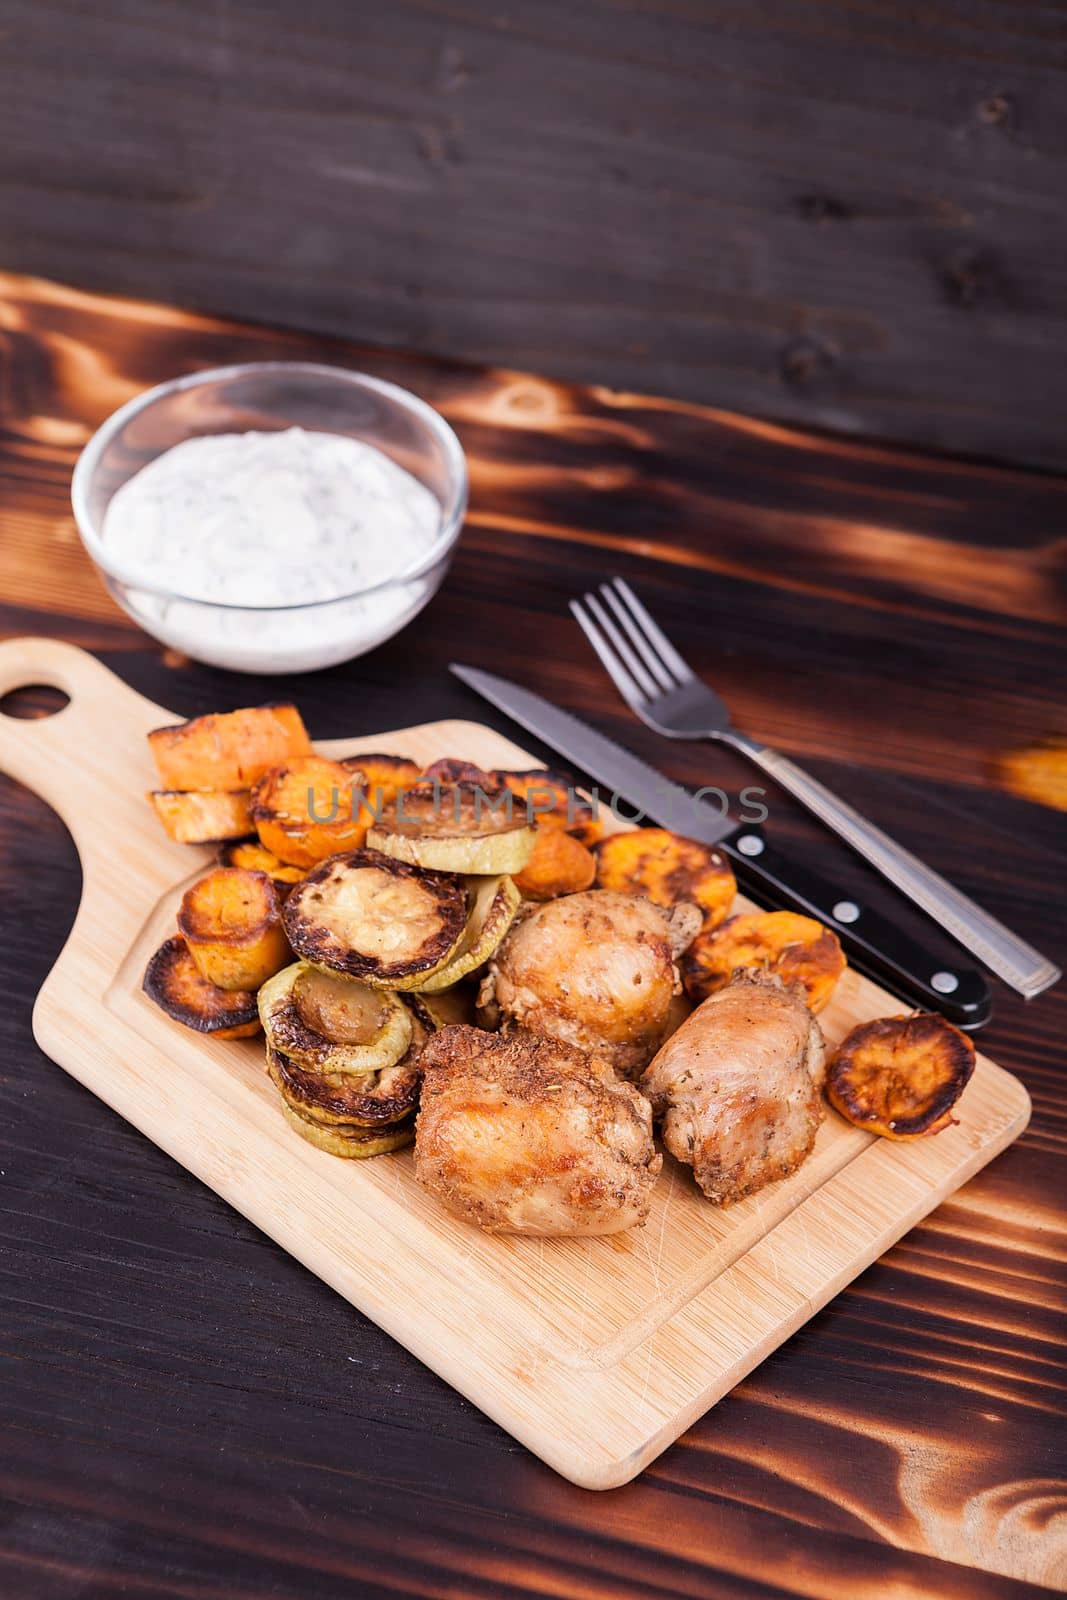 Grilled chicken next to fried zucchini and sweet potatoes on wooden background